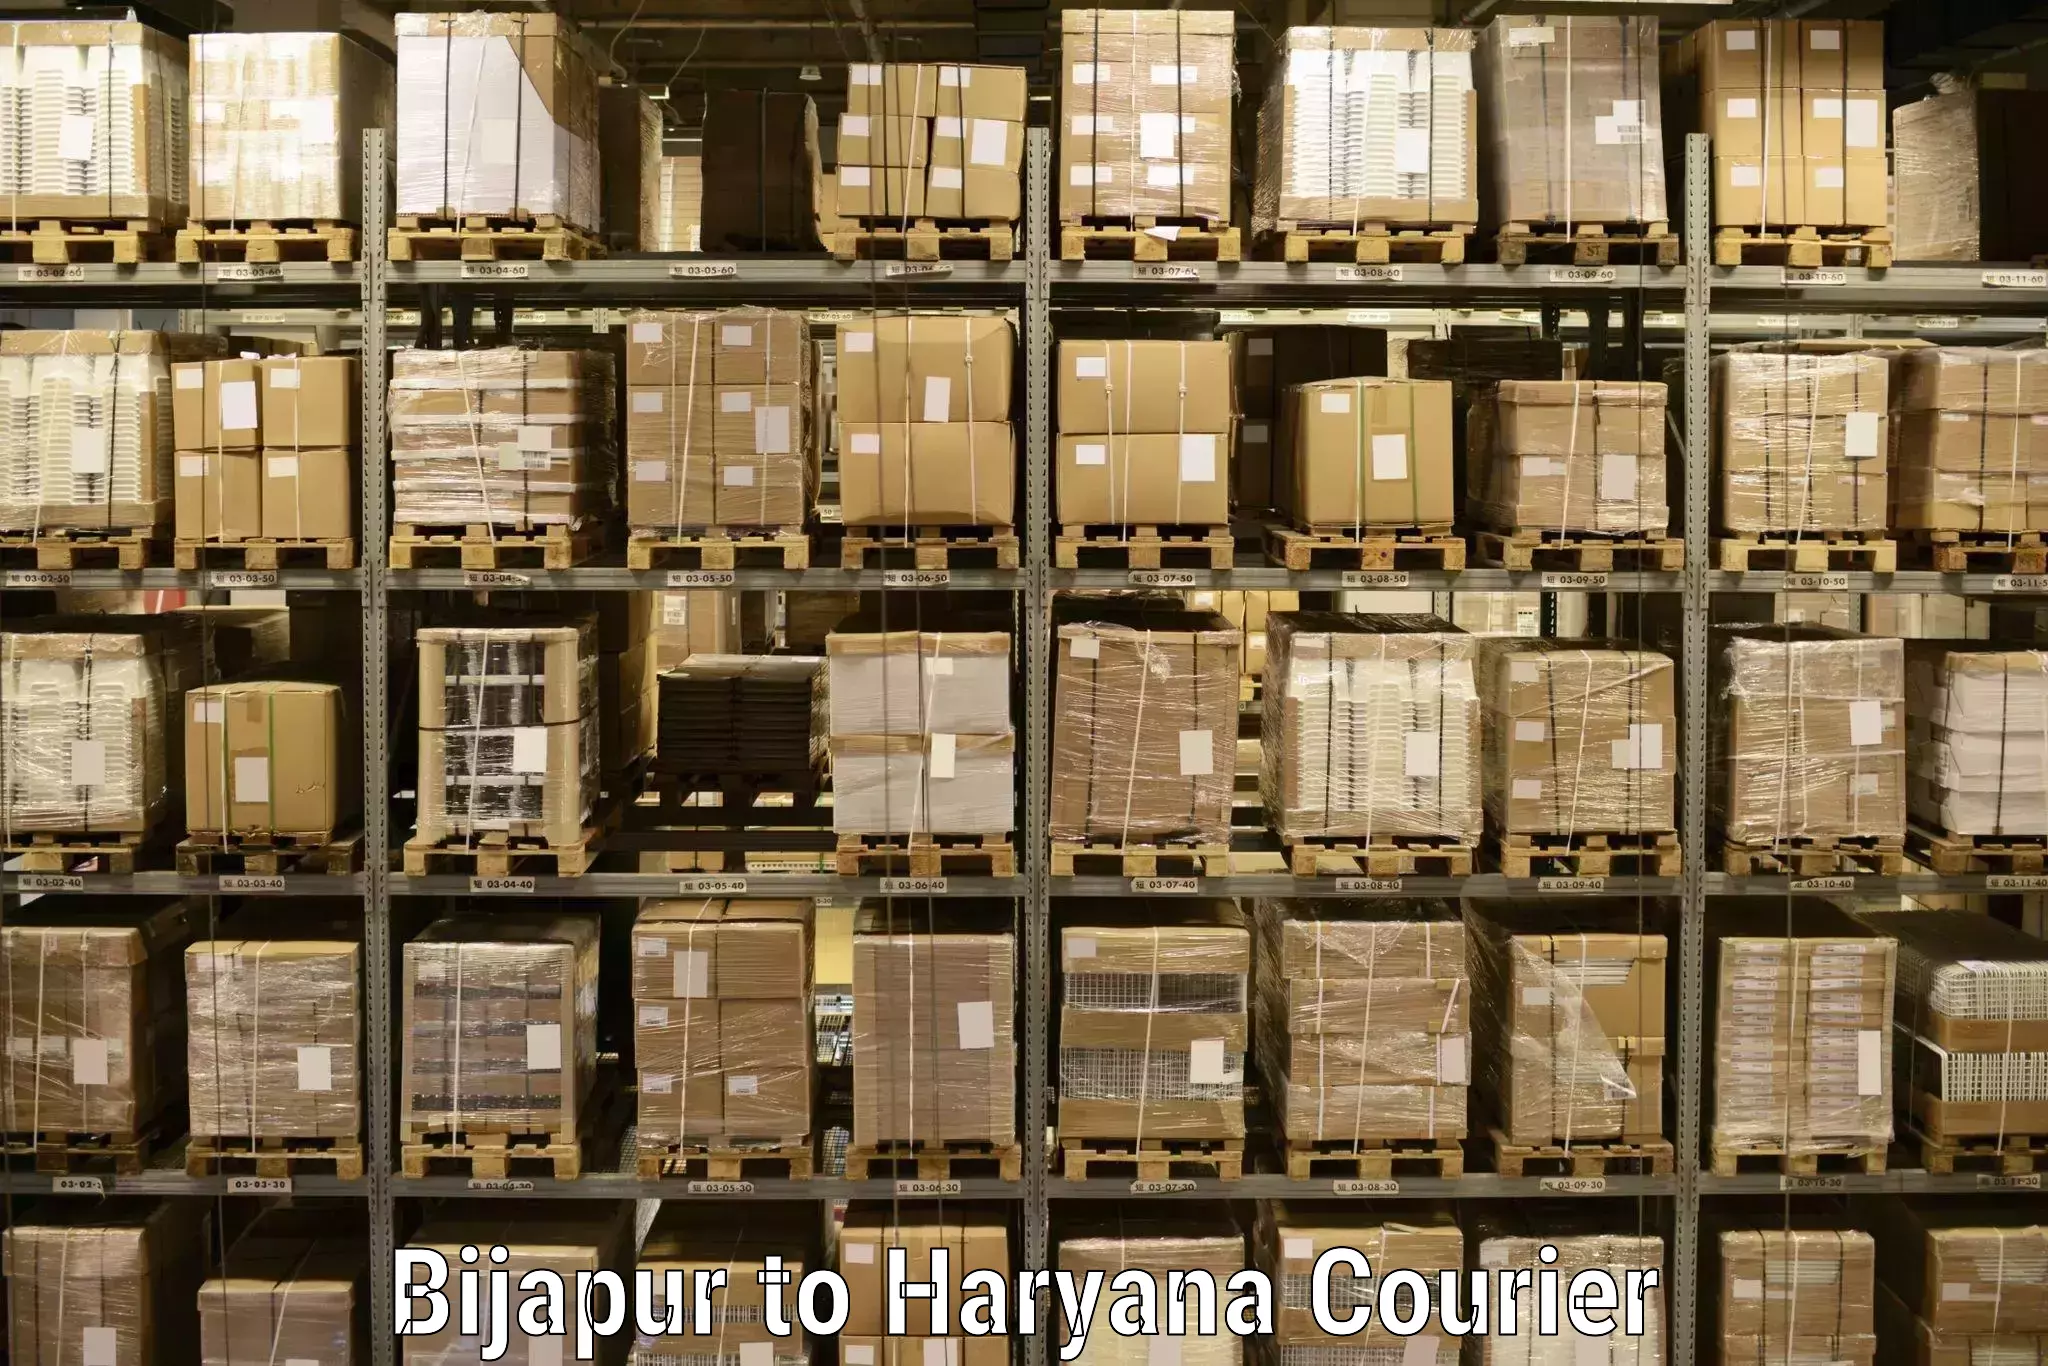 Package delivery network Bijapur to Karnal